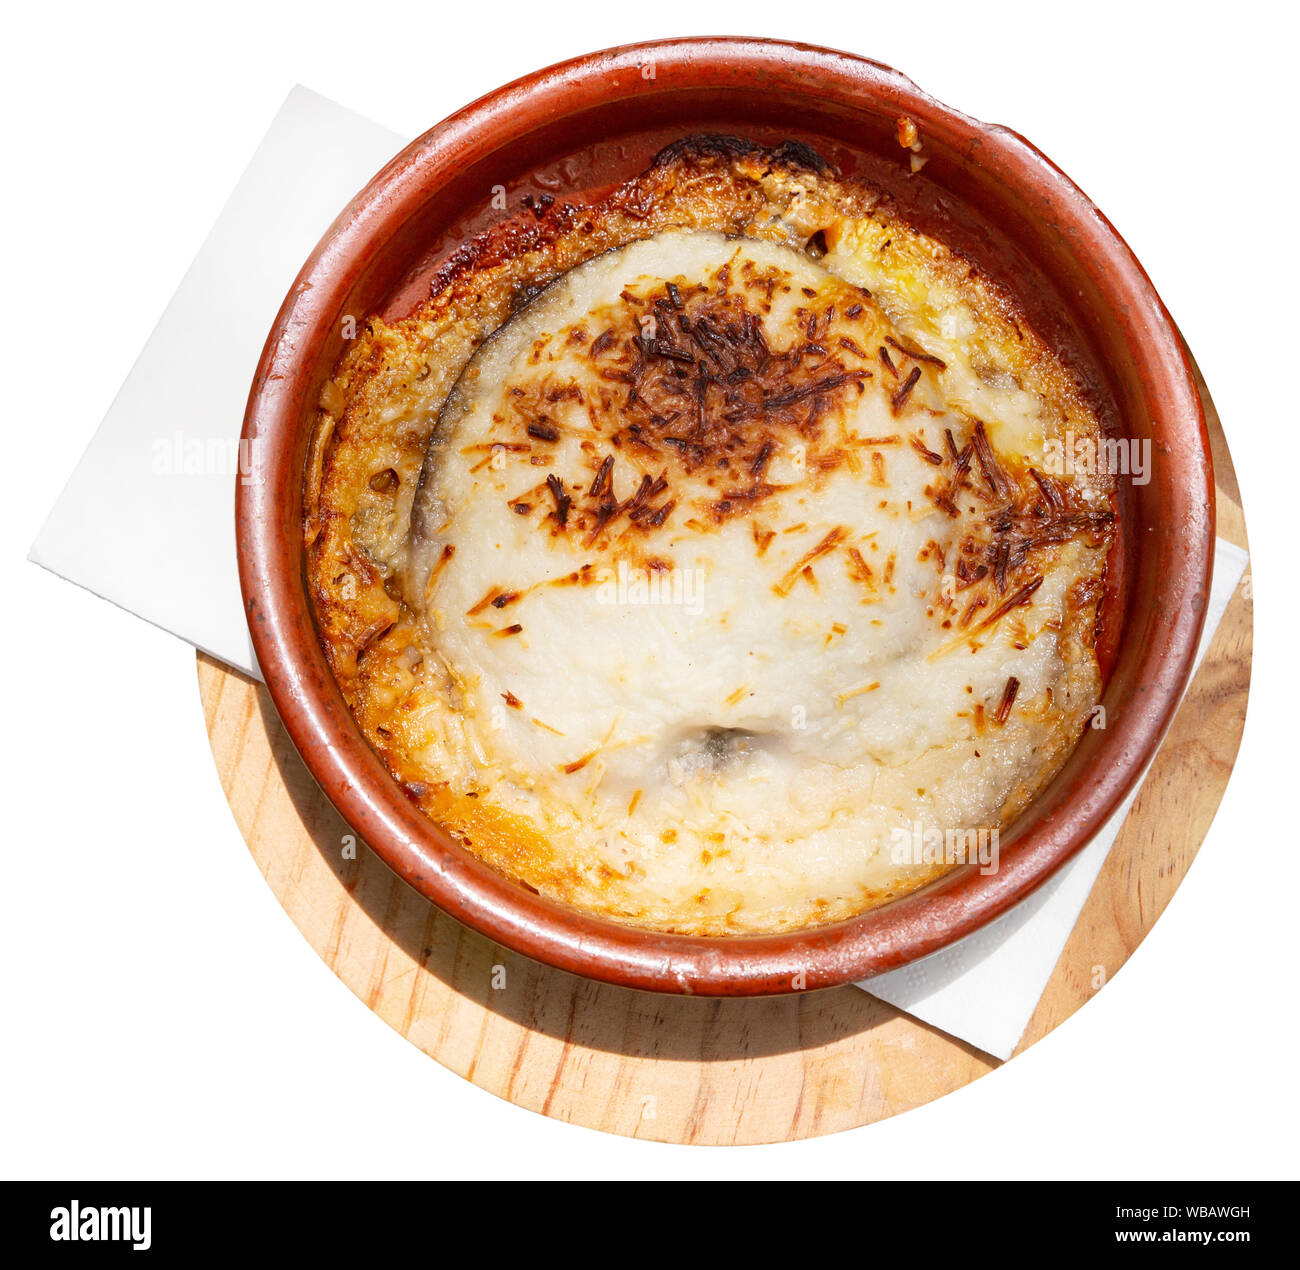 Top view of delicious Greek moussaka from baked eggplant with olive oil, meat mince and bechamel sauce served in pottery. Isolated over white backgrou Stock Photo